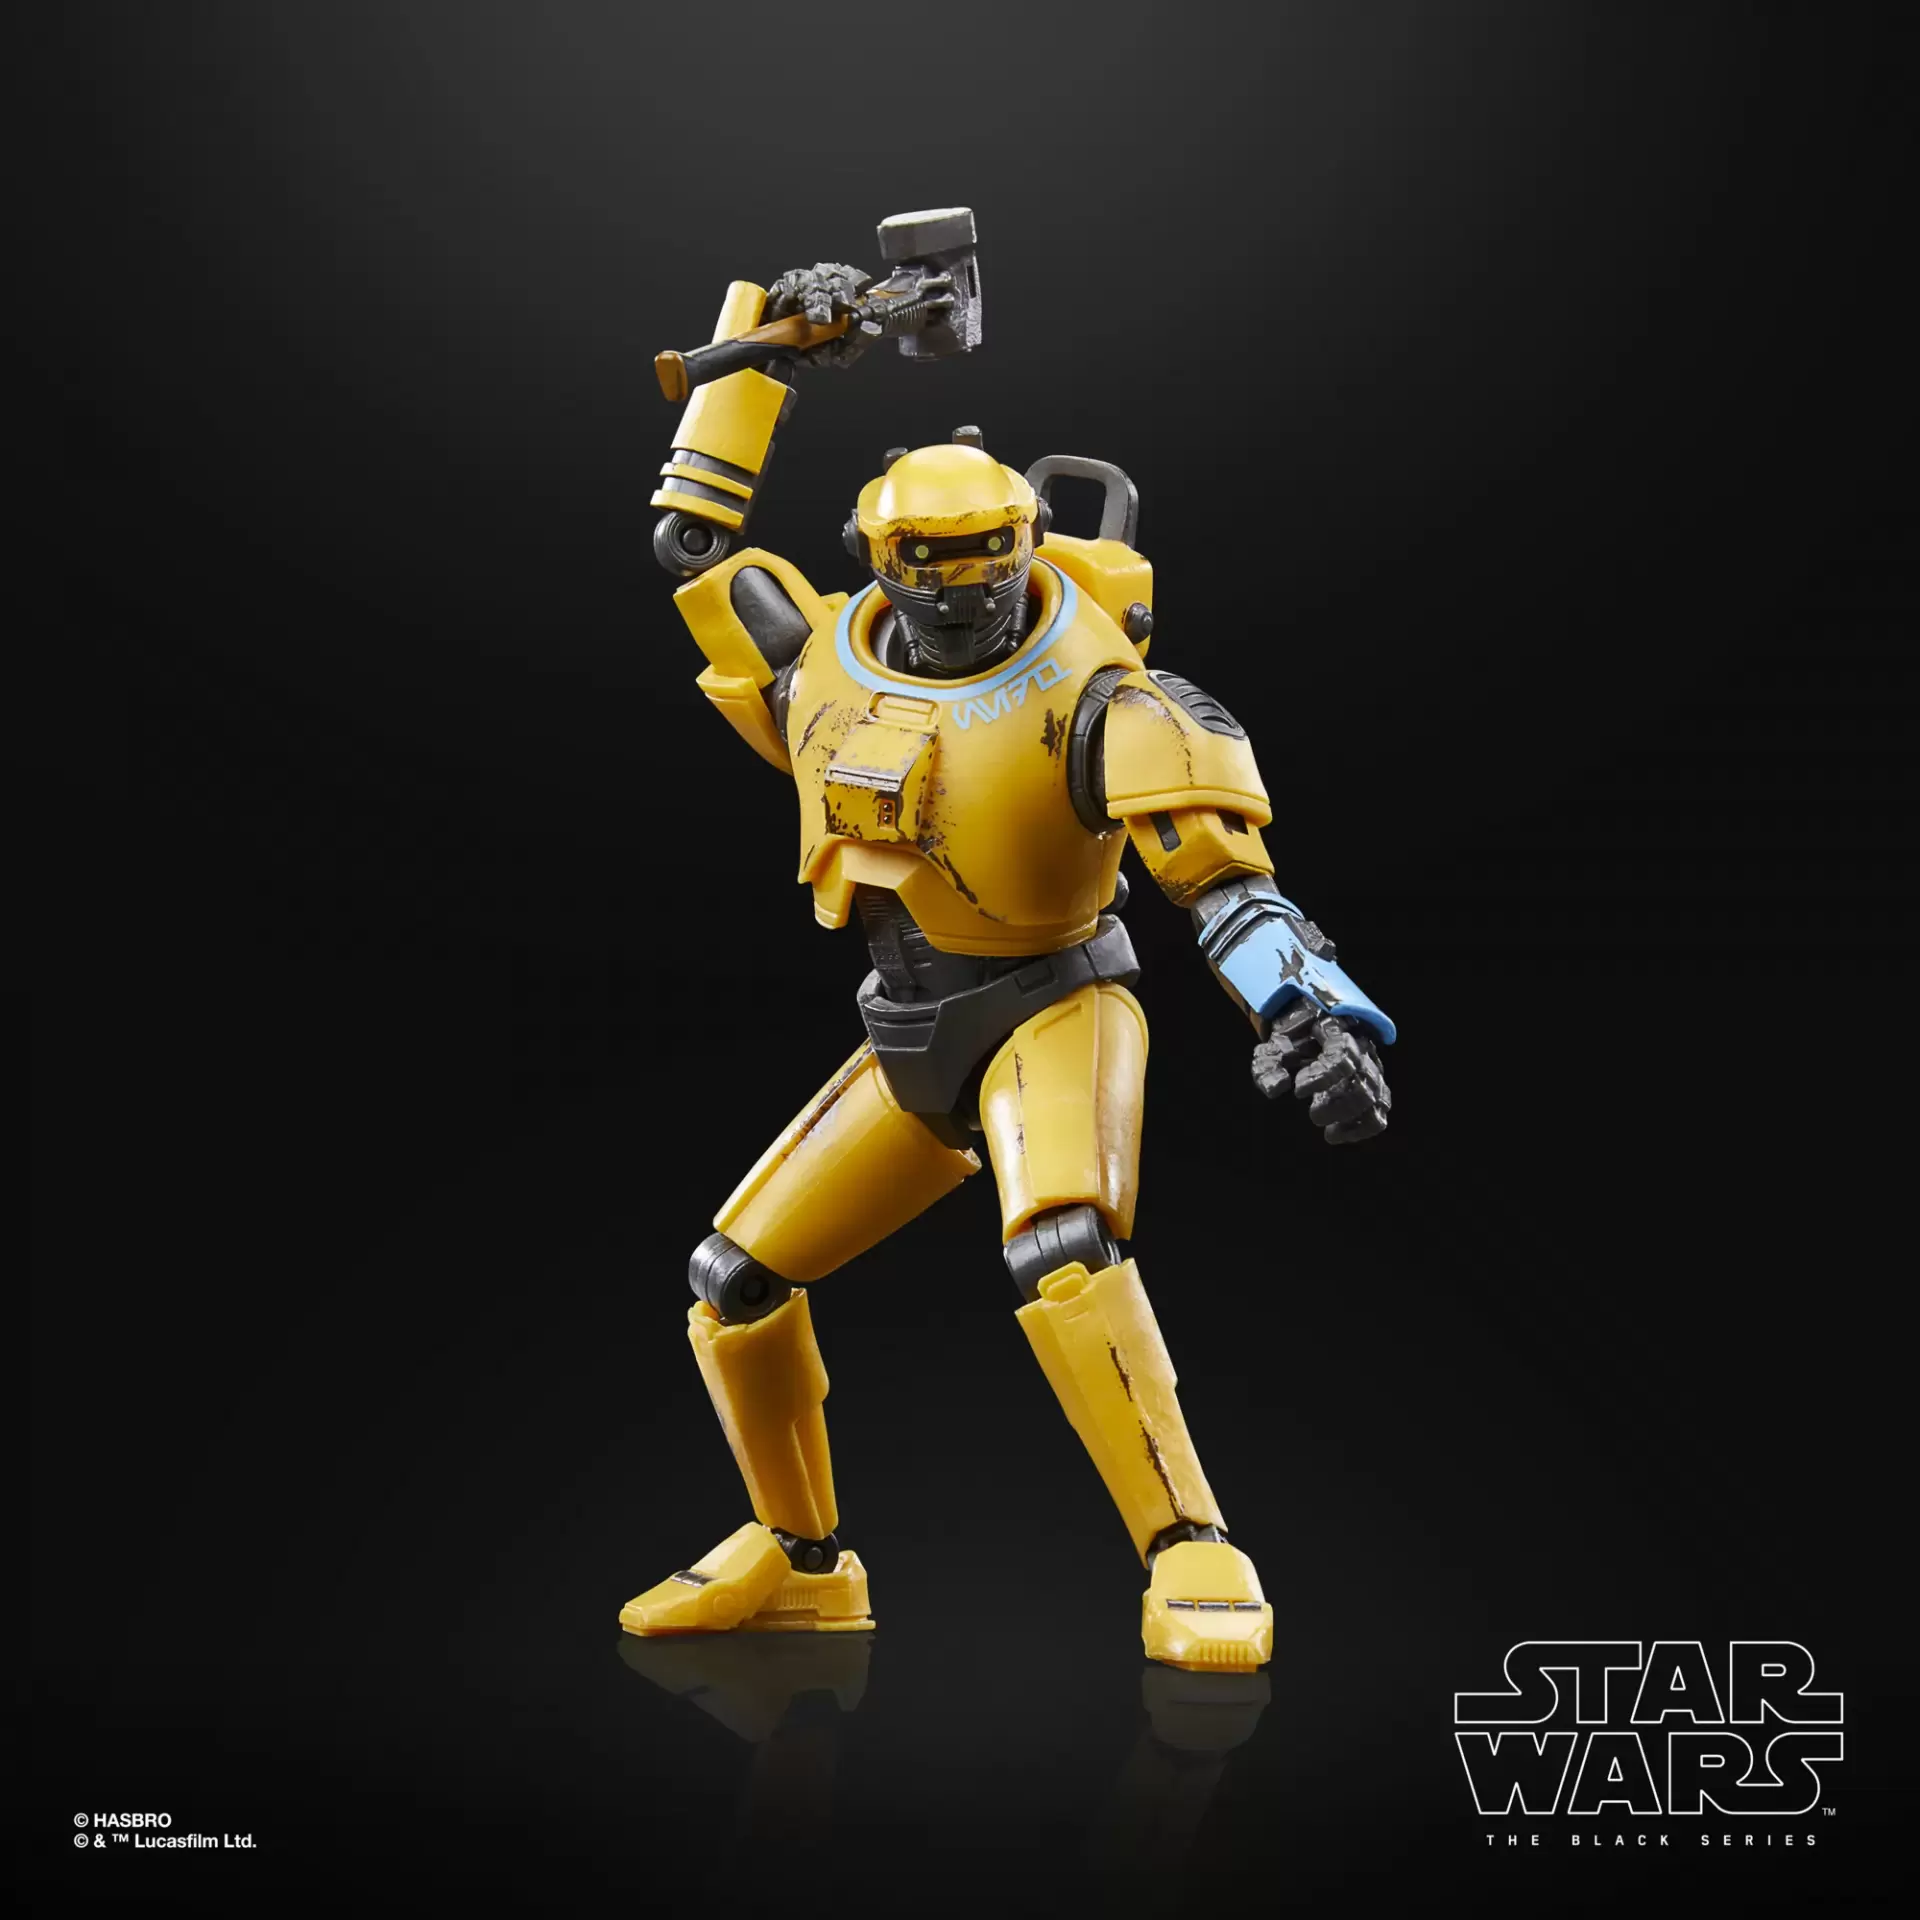 Star wars the black series ned b deluxe jawascave